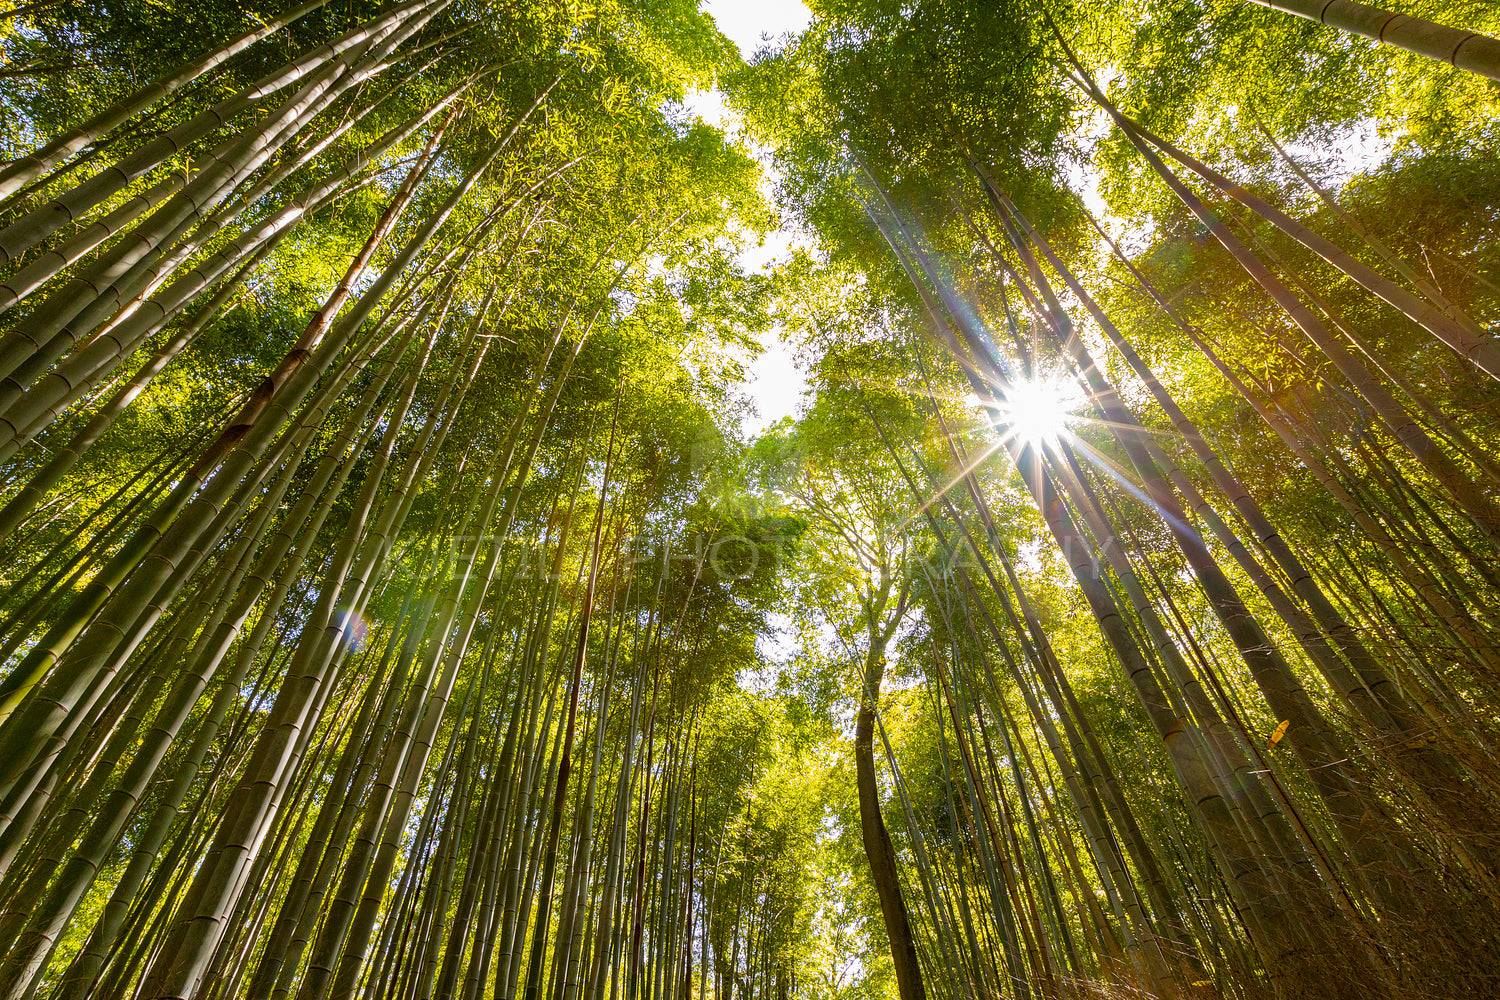 Low angle view of bamboo grove in forest against the sun